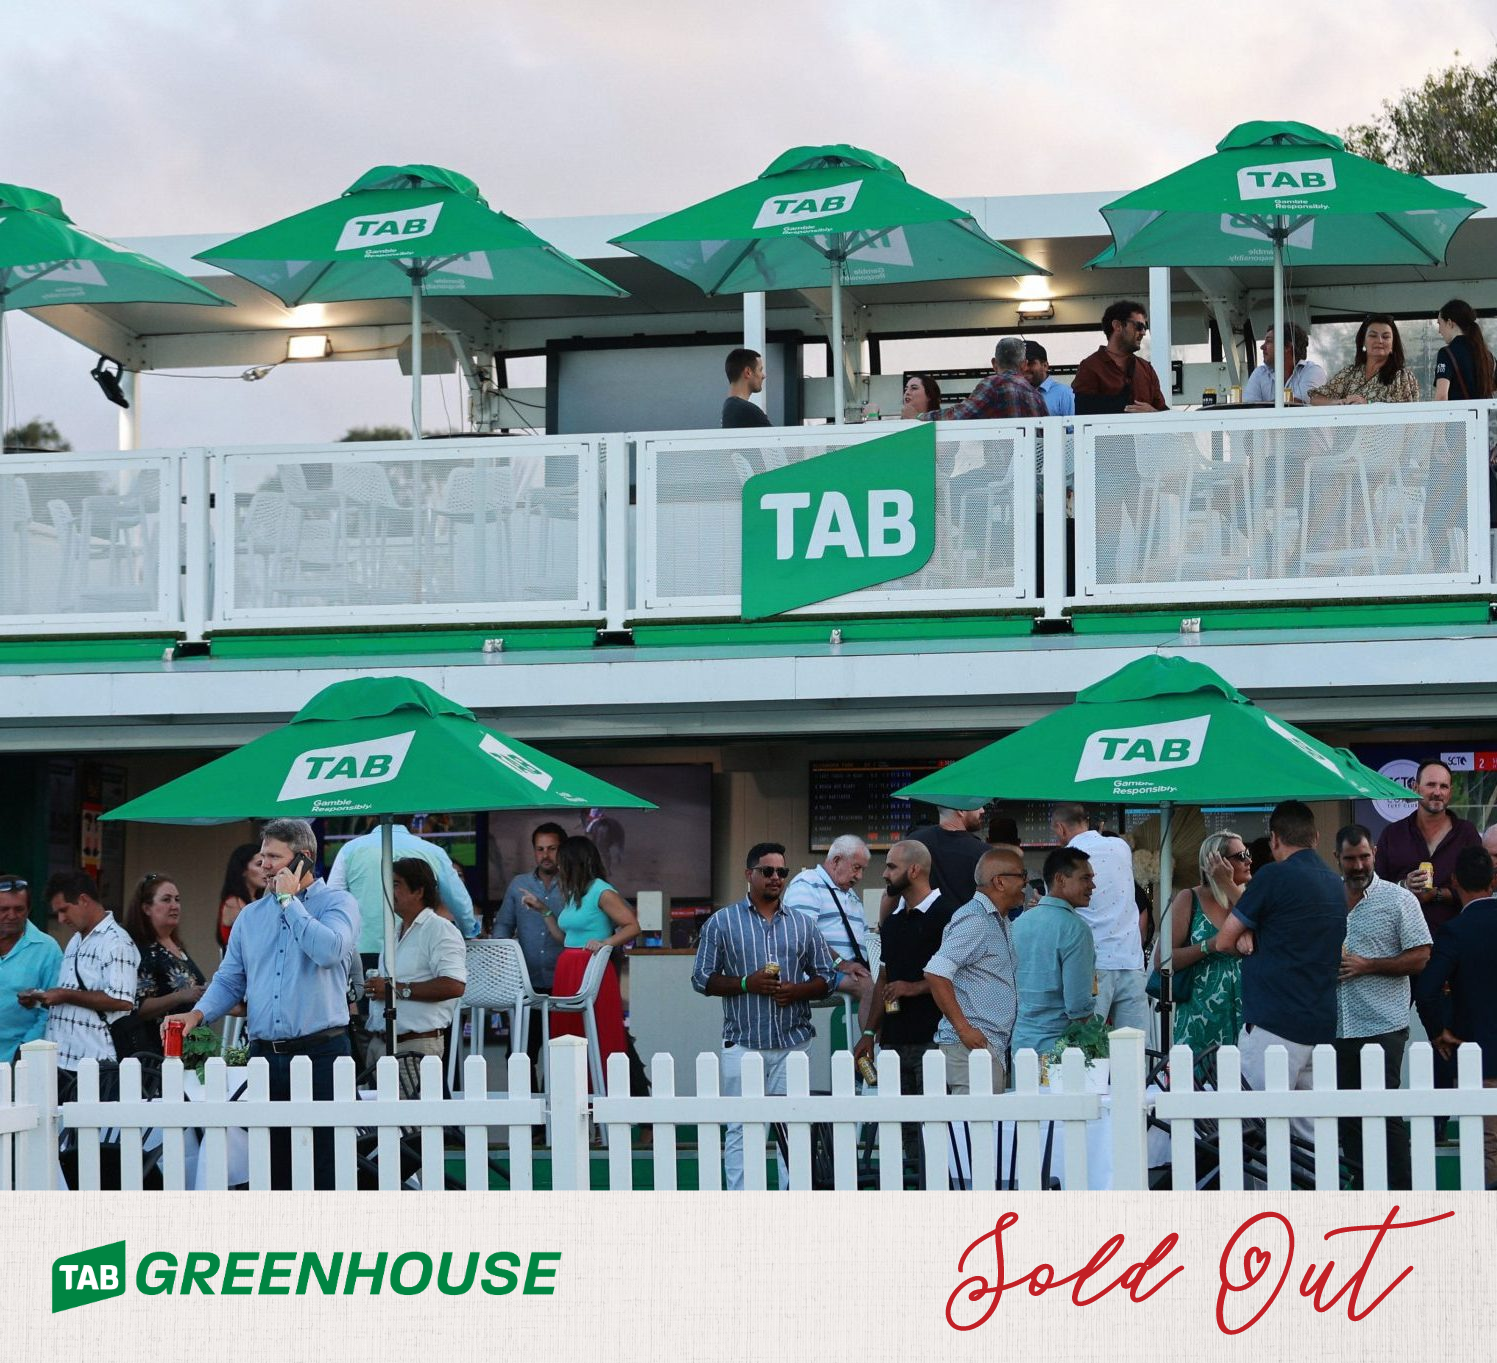 TAB Greenhouse SOLD OUT